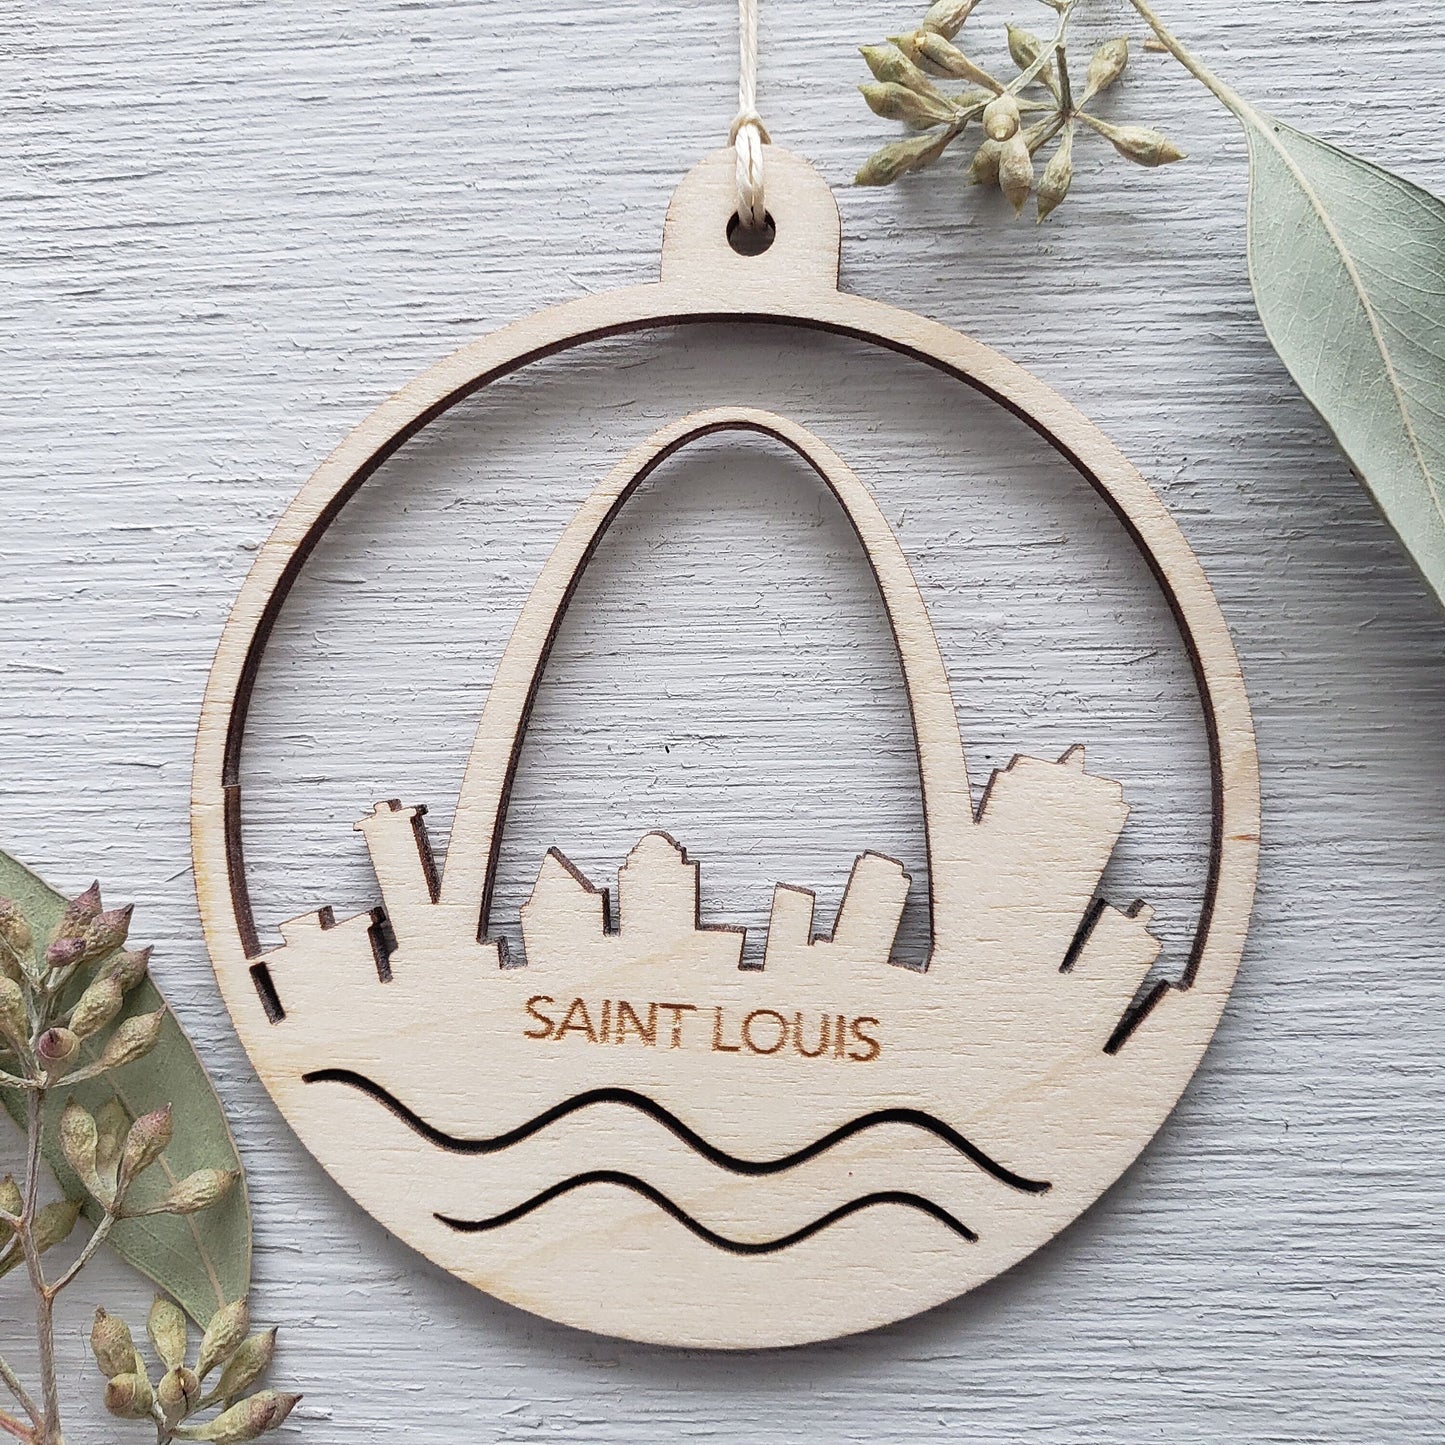 St Louis Skyline Christmas Ornament - St Louis Arch - Holiday Wine Tag - Teacher Gift